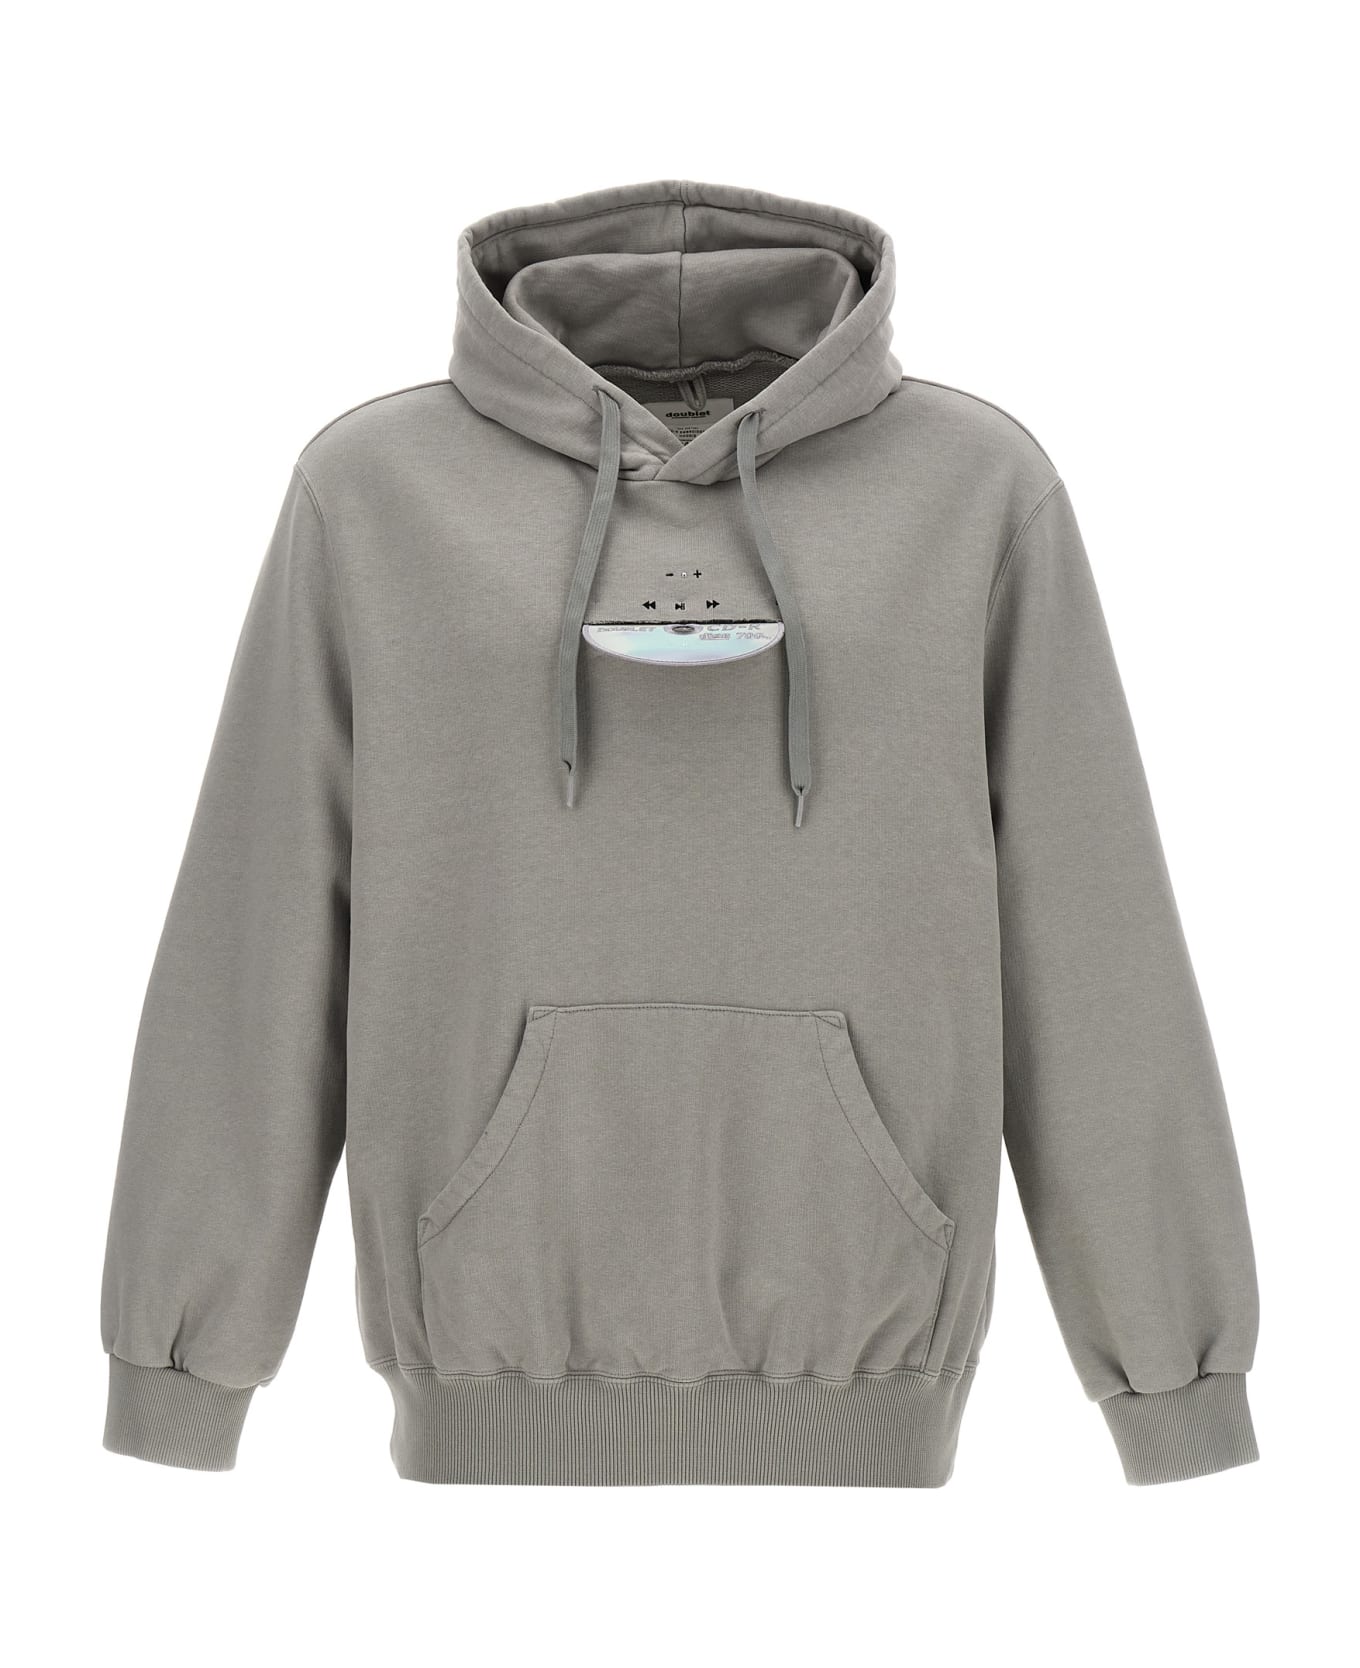 doublet 'cd-r Embroidery' Hoodie - Gray